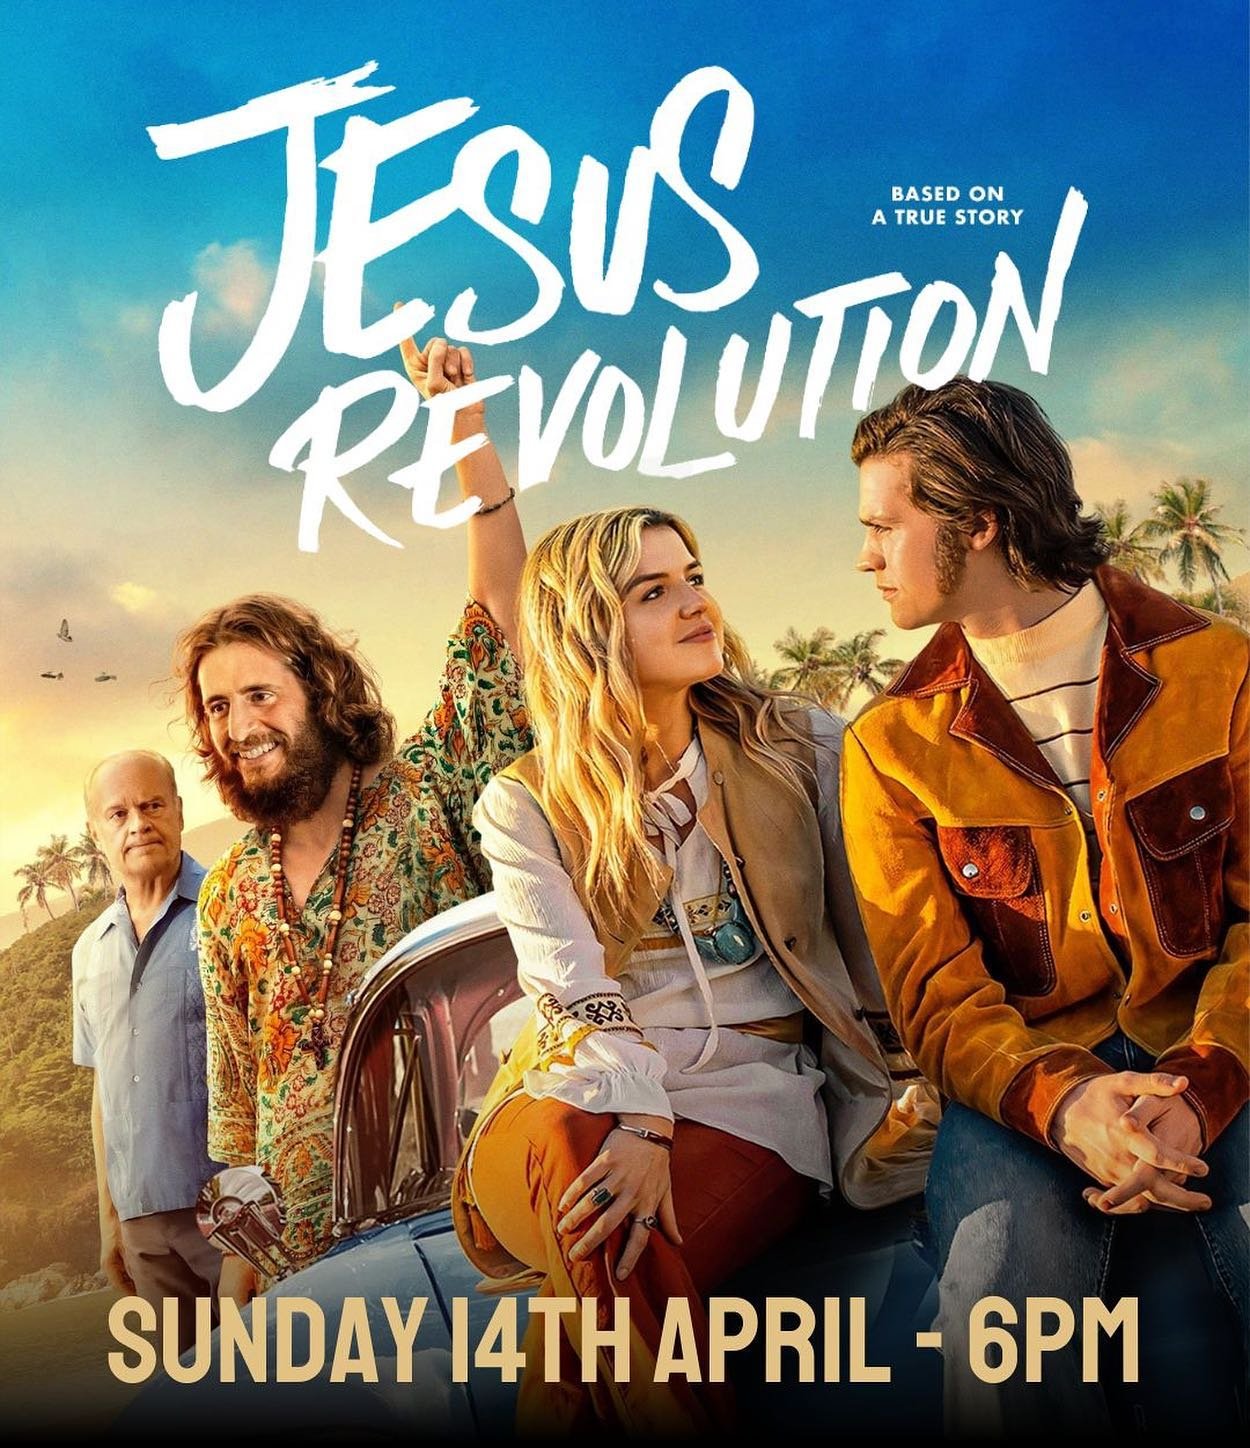 This Sunday Night at Church 🎞️🍿

Jesus Revolution ✝️ a movie based on the true events of the Christian revival that swept across America in the 70s.

⏰ Sunday 14th April - 6pm
📍 Autumnleaf Neighborhood Centre, St Clair